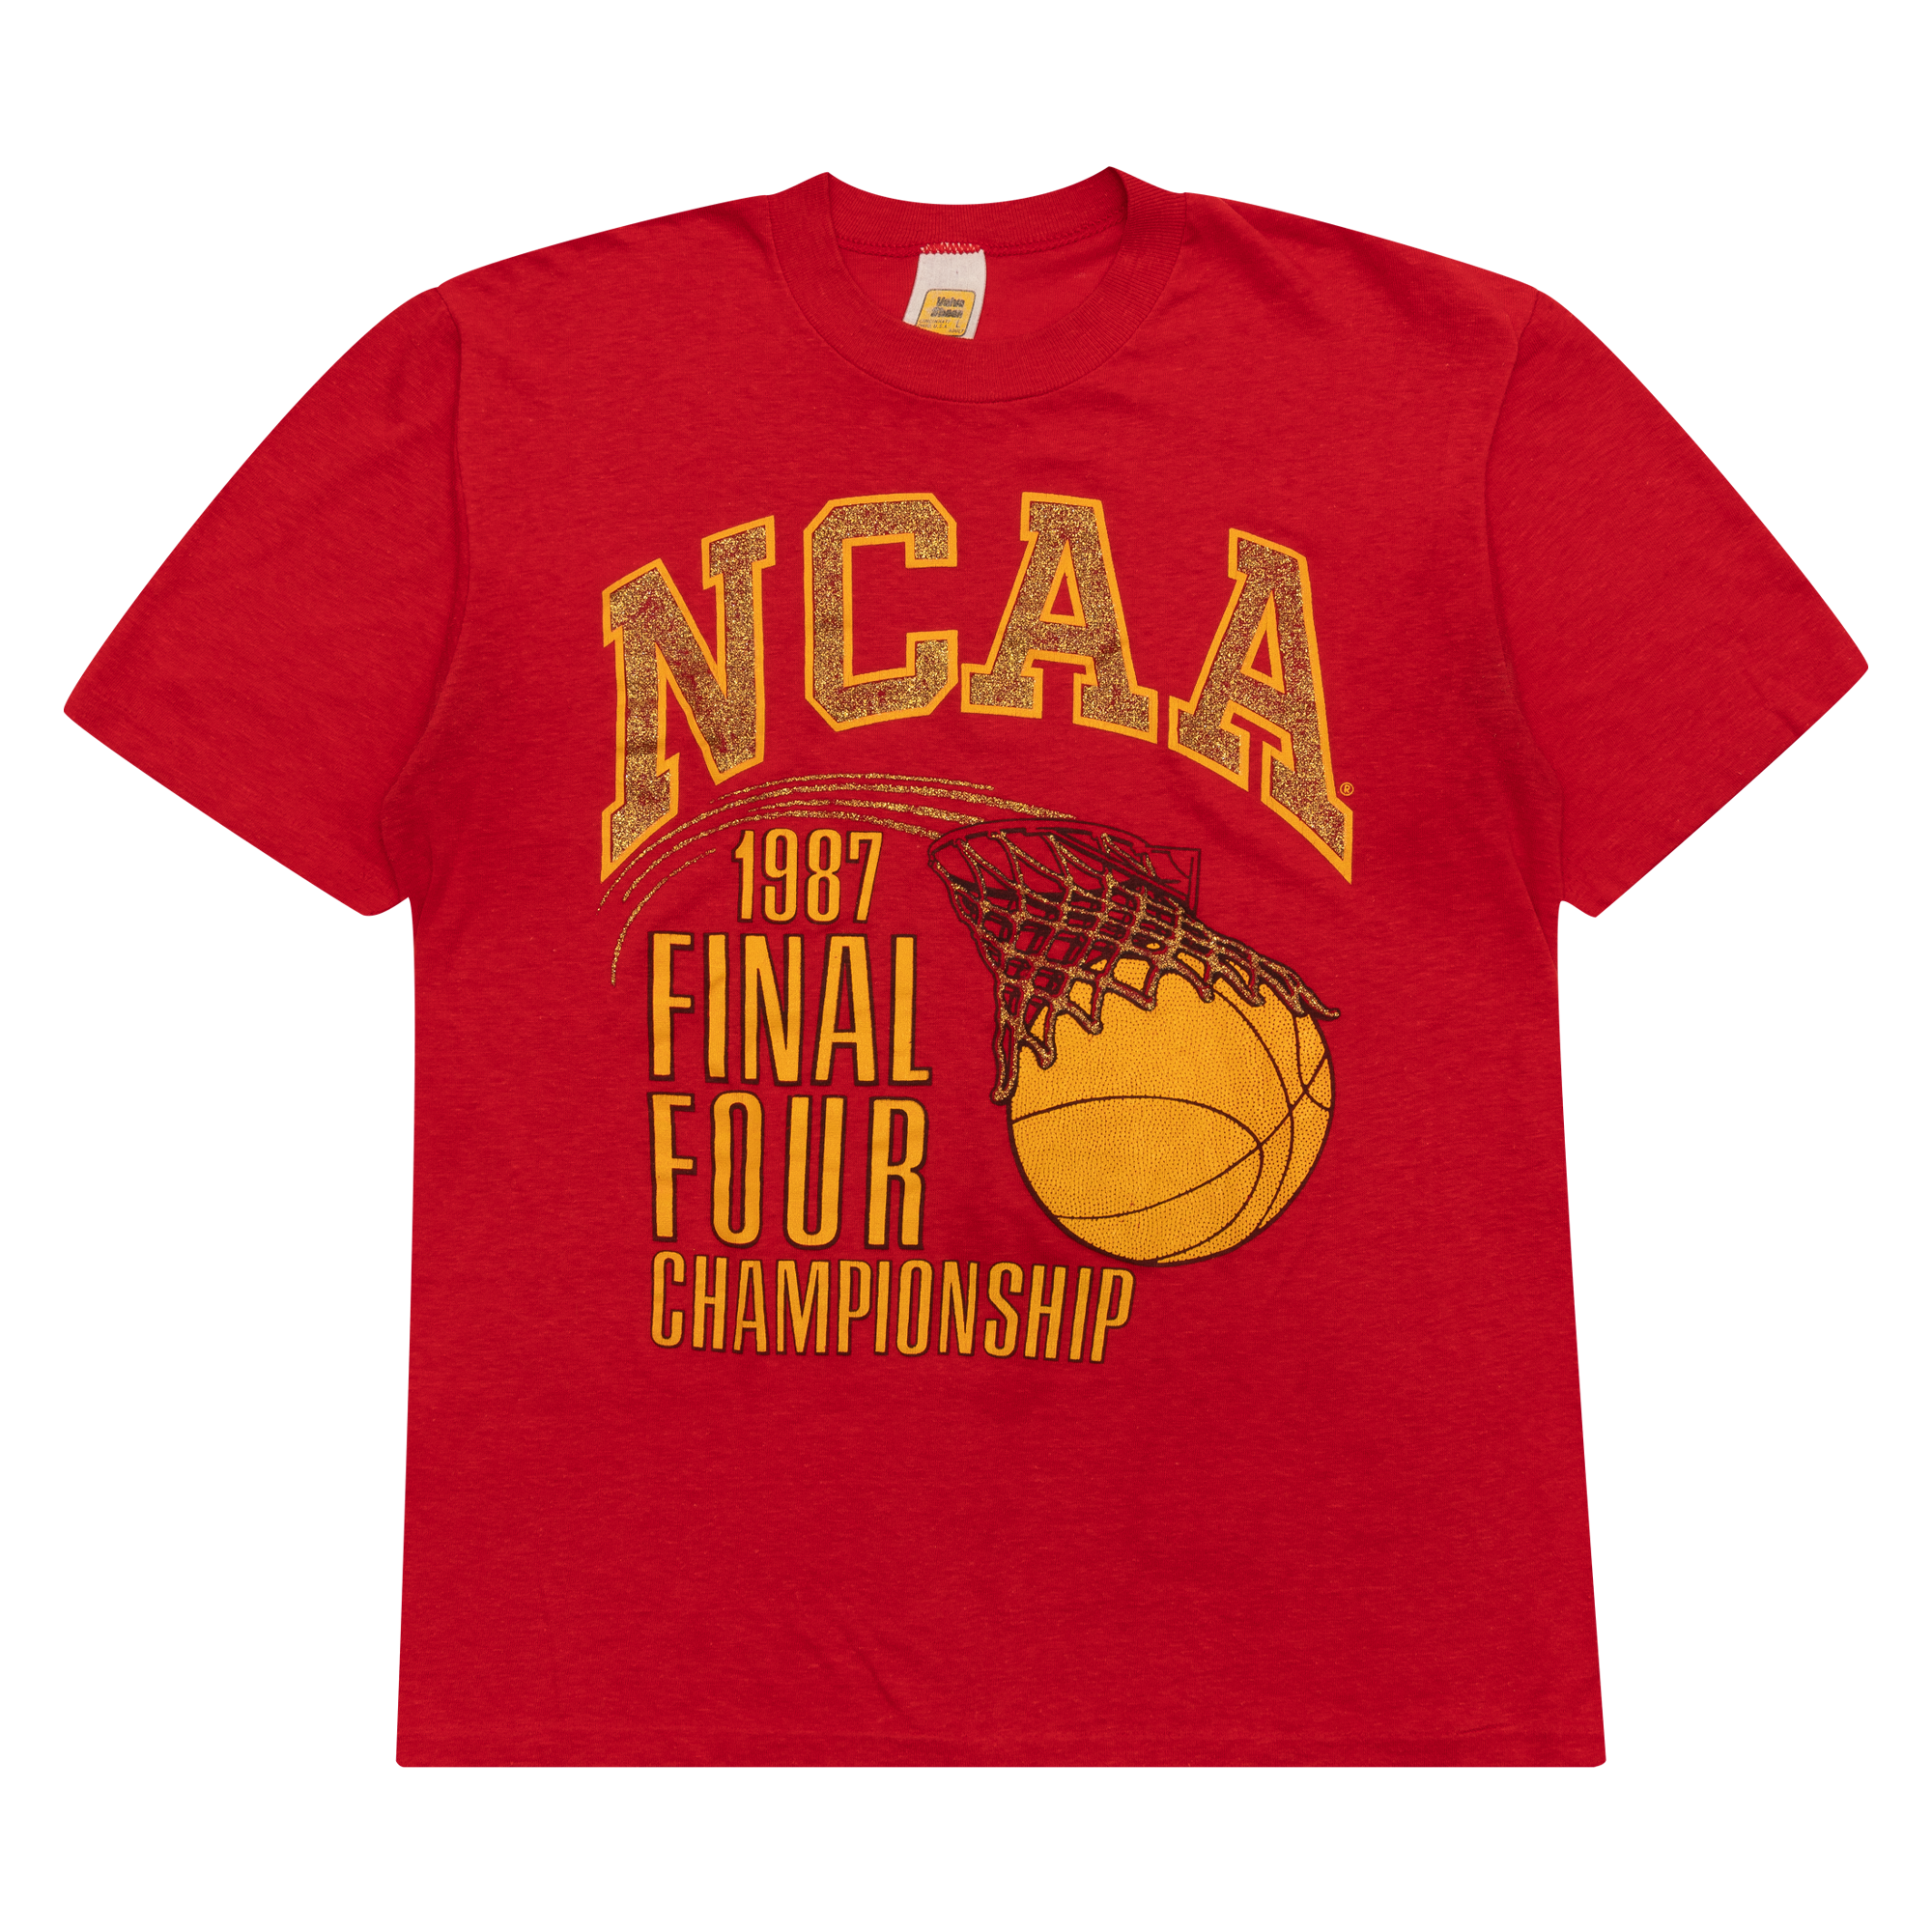 NCAA 1987 Final Four Champions Tee Red-PLUS